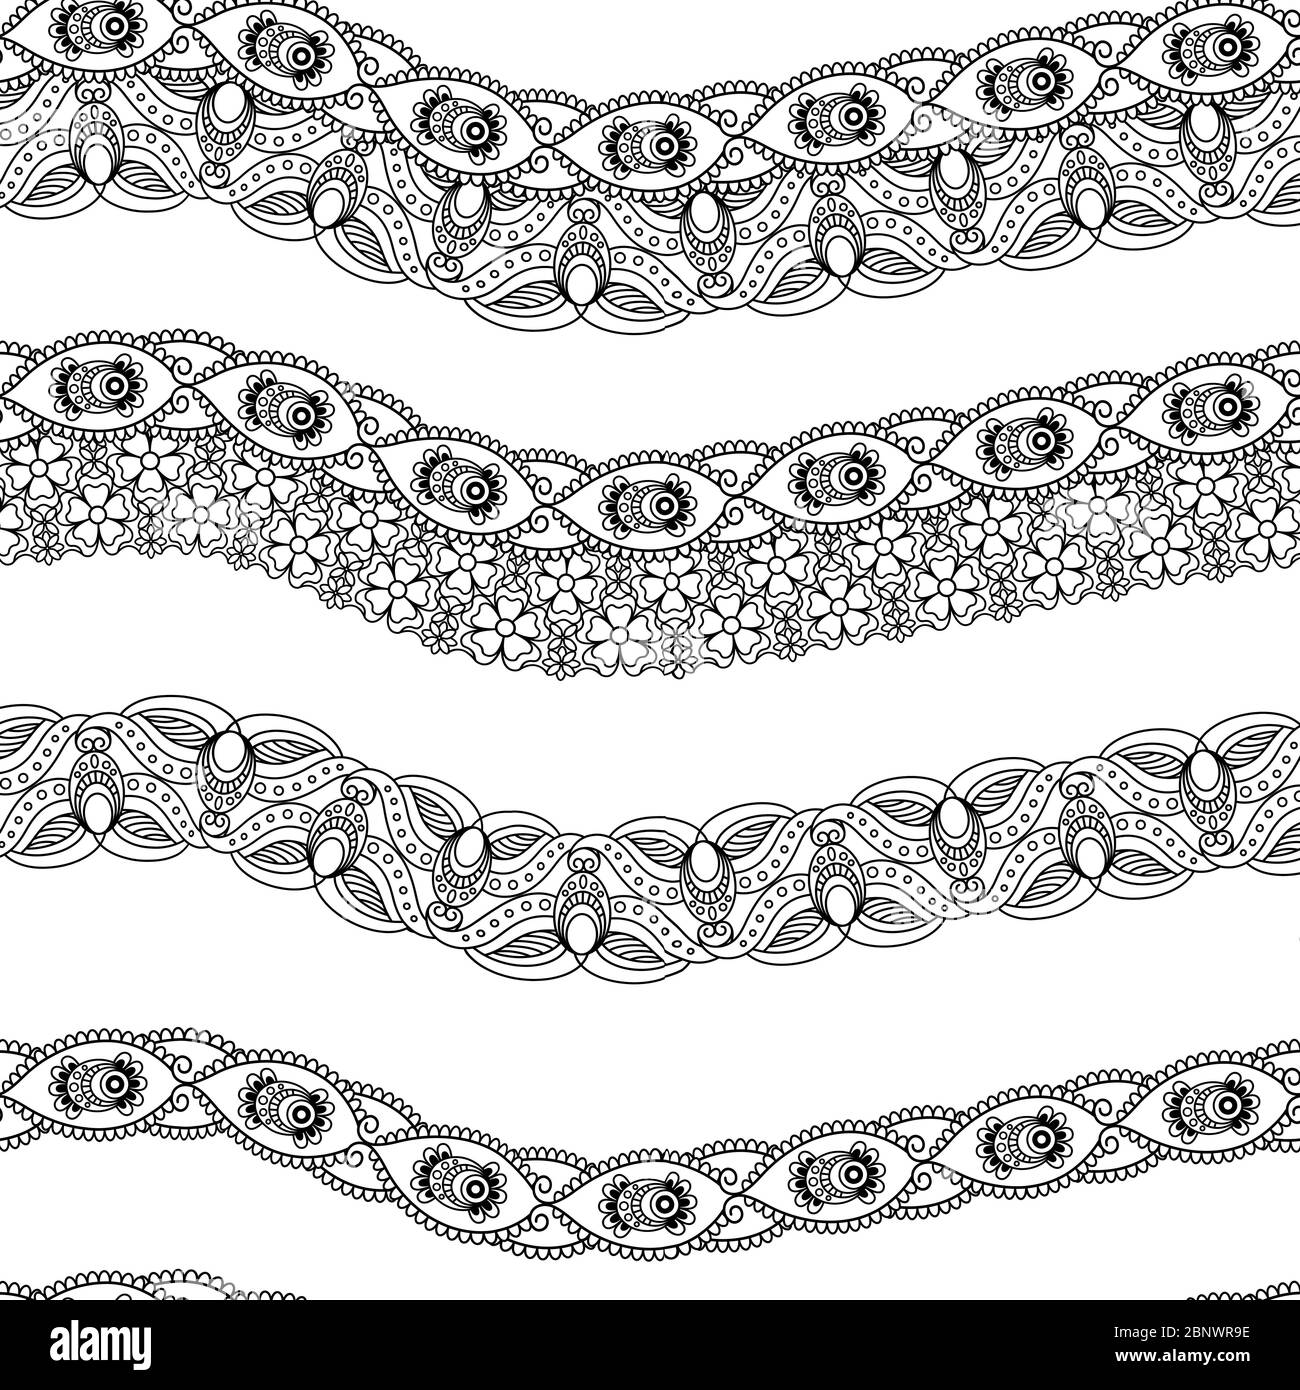 Ornamental Indian Black and White Seamless Pattern with spaces. Vector illustration Stock Vector